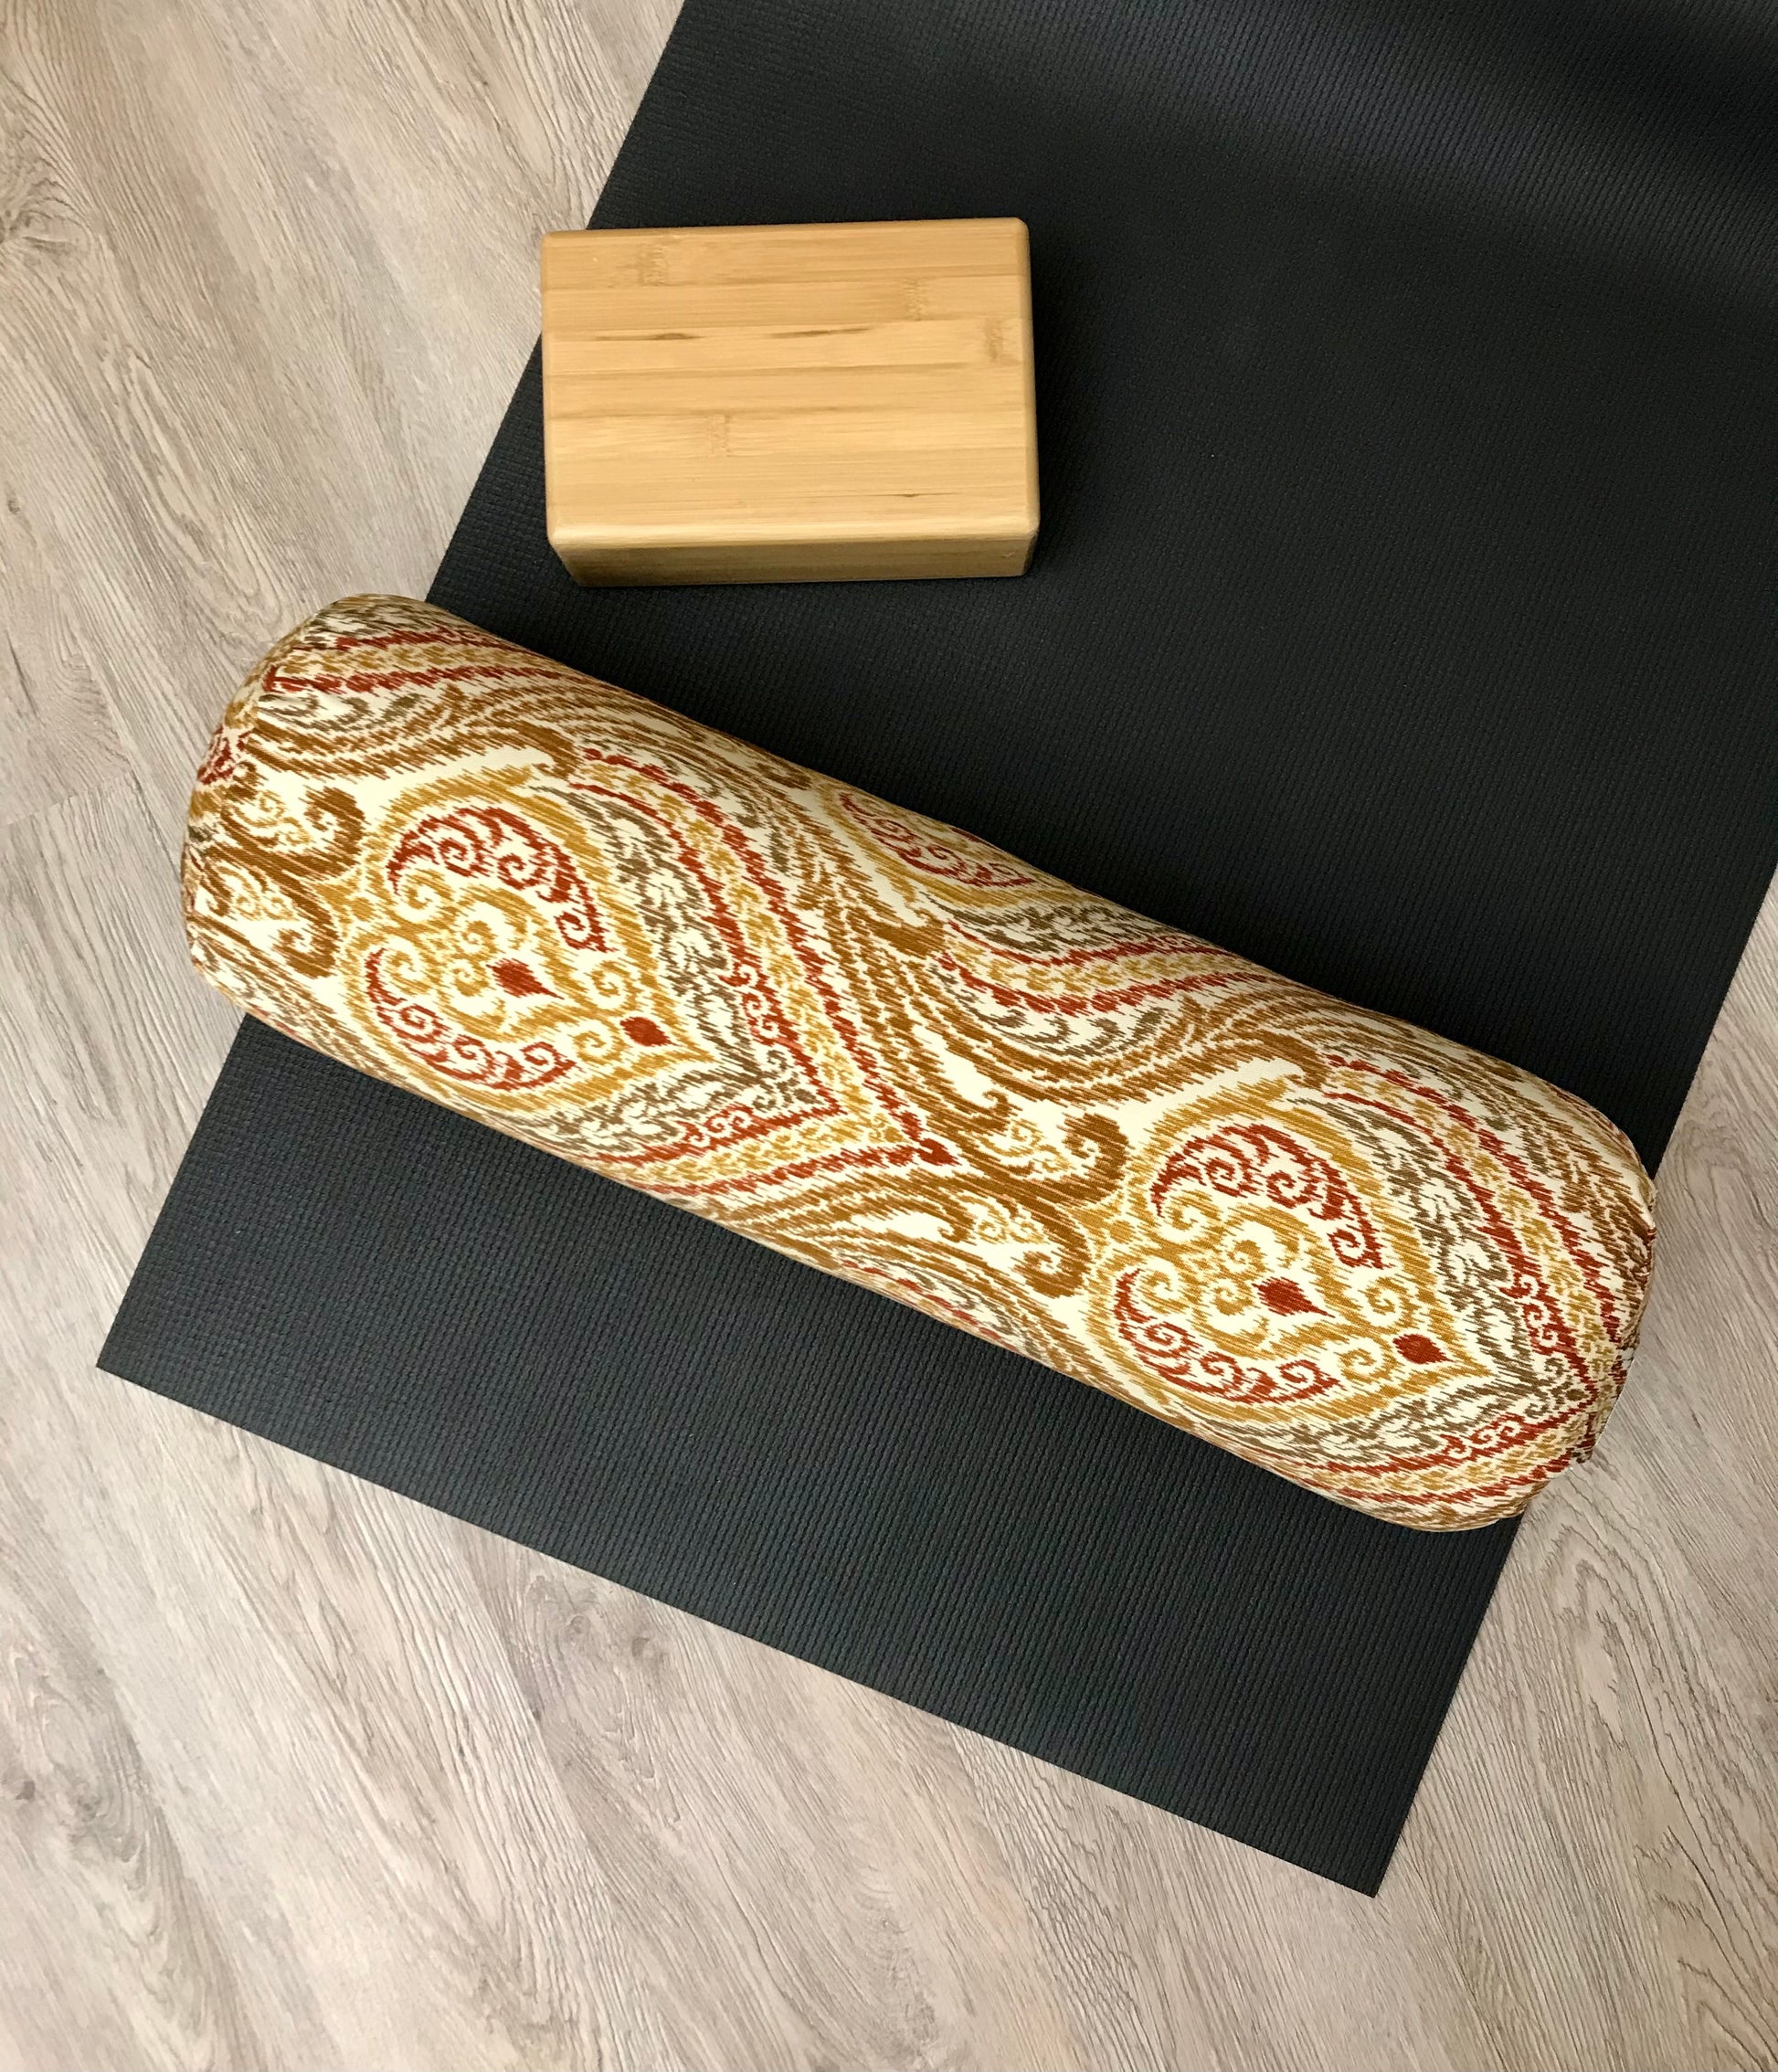 Round yoga bolster in durable cotton canvas, orange and red ikat print fabric. Allergy conscious fill with removeable cover. Made in Canada by My Yoga Room Elements